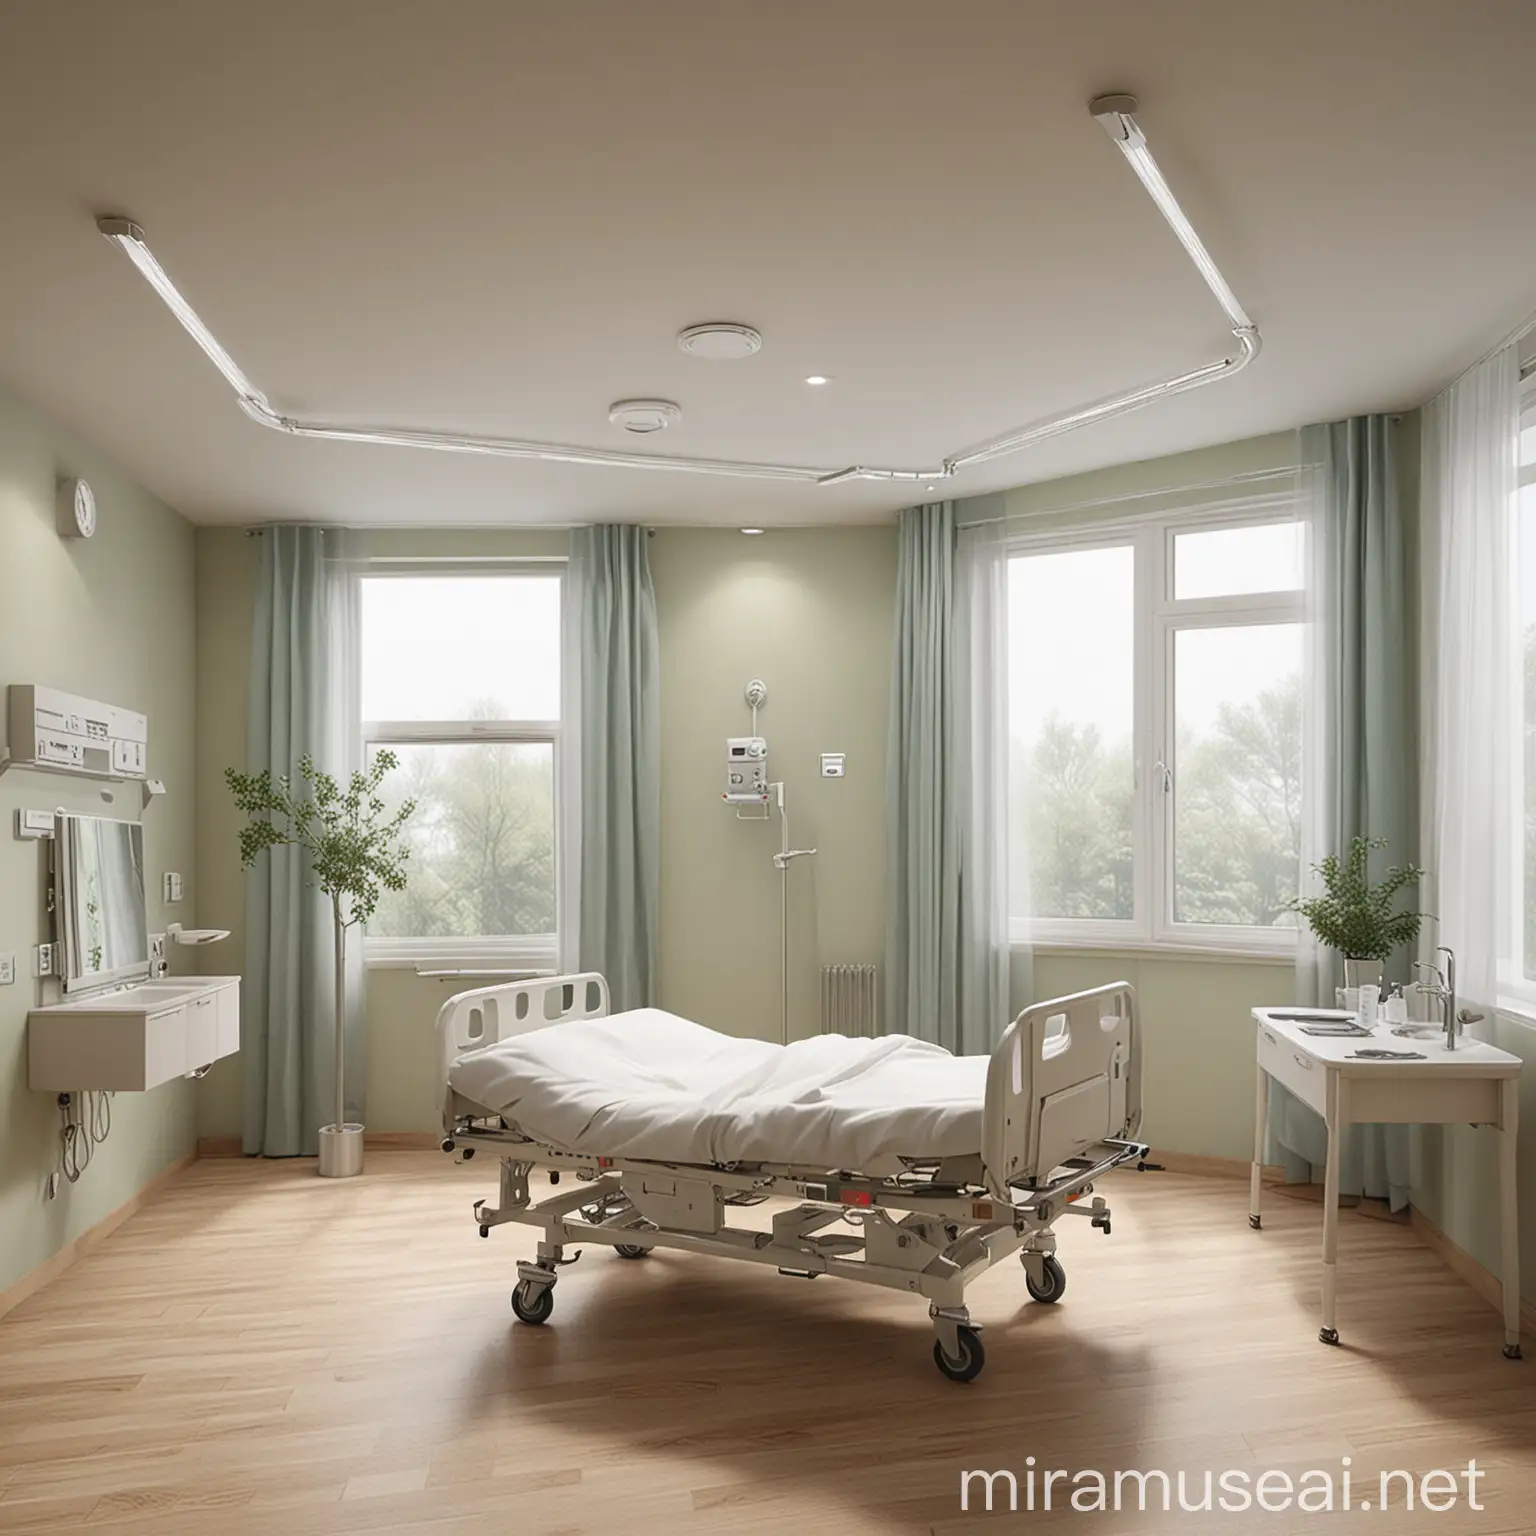 Hospital Room for Cancer Patients RestOptimized Healing Environment